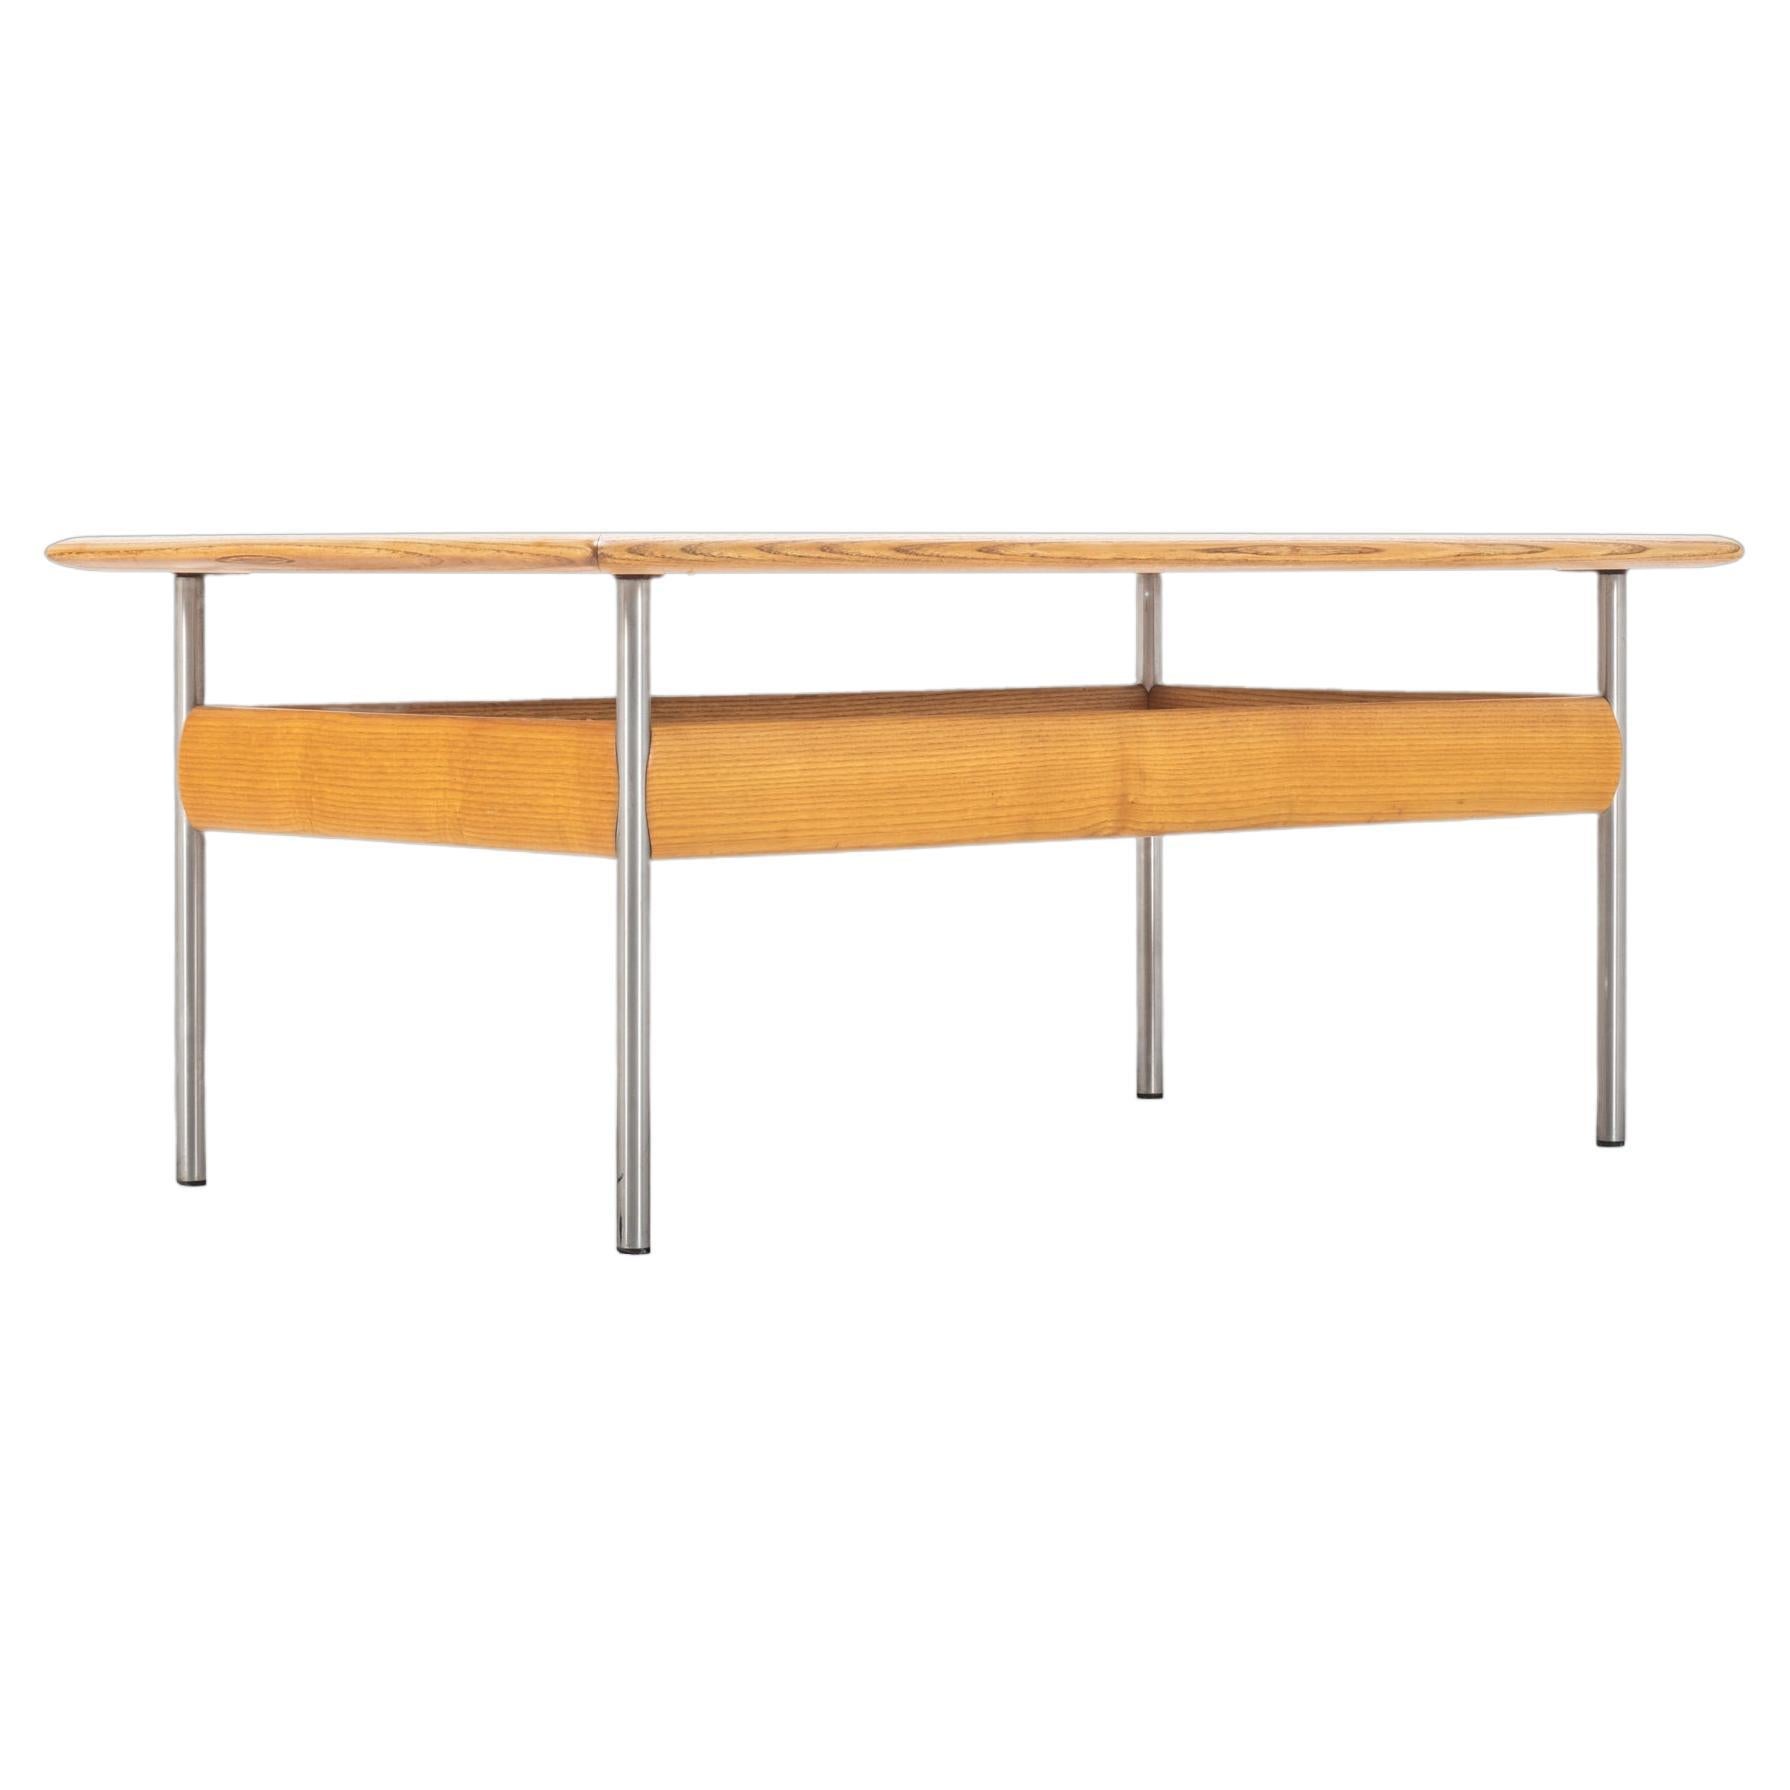 Scandinavian Oak Coffee Table Attributed to Sven Ivar Dysthe for Dokka, c. 1970s For Sale